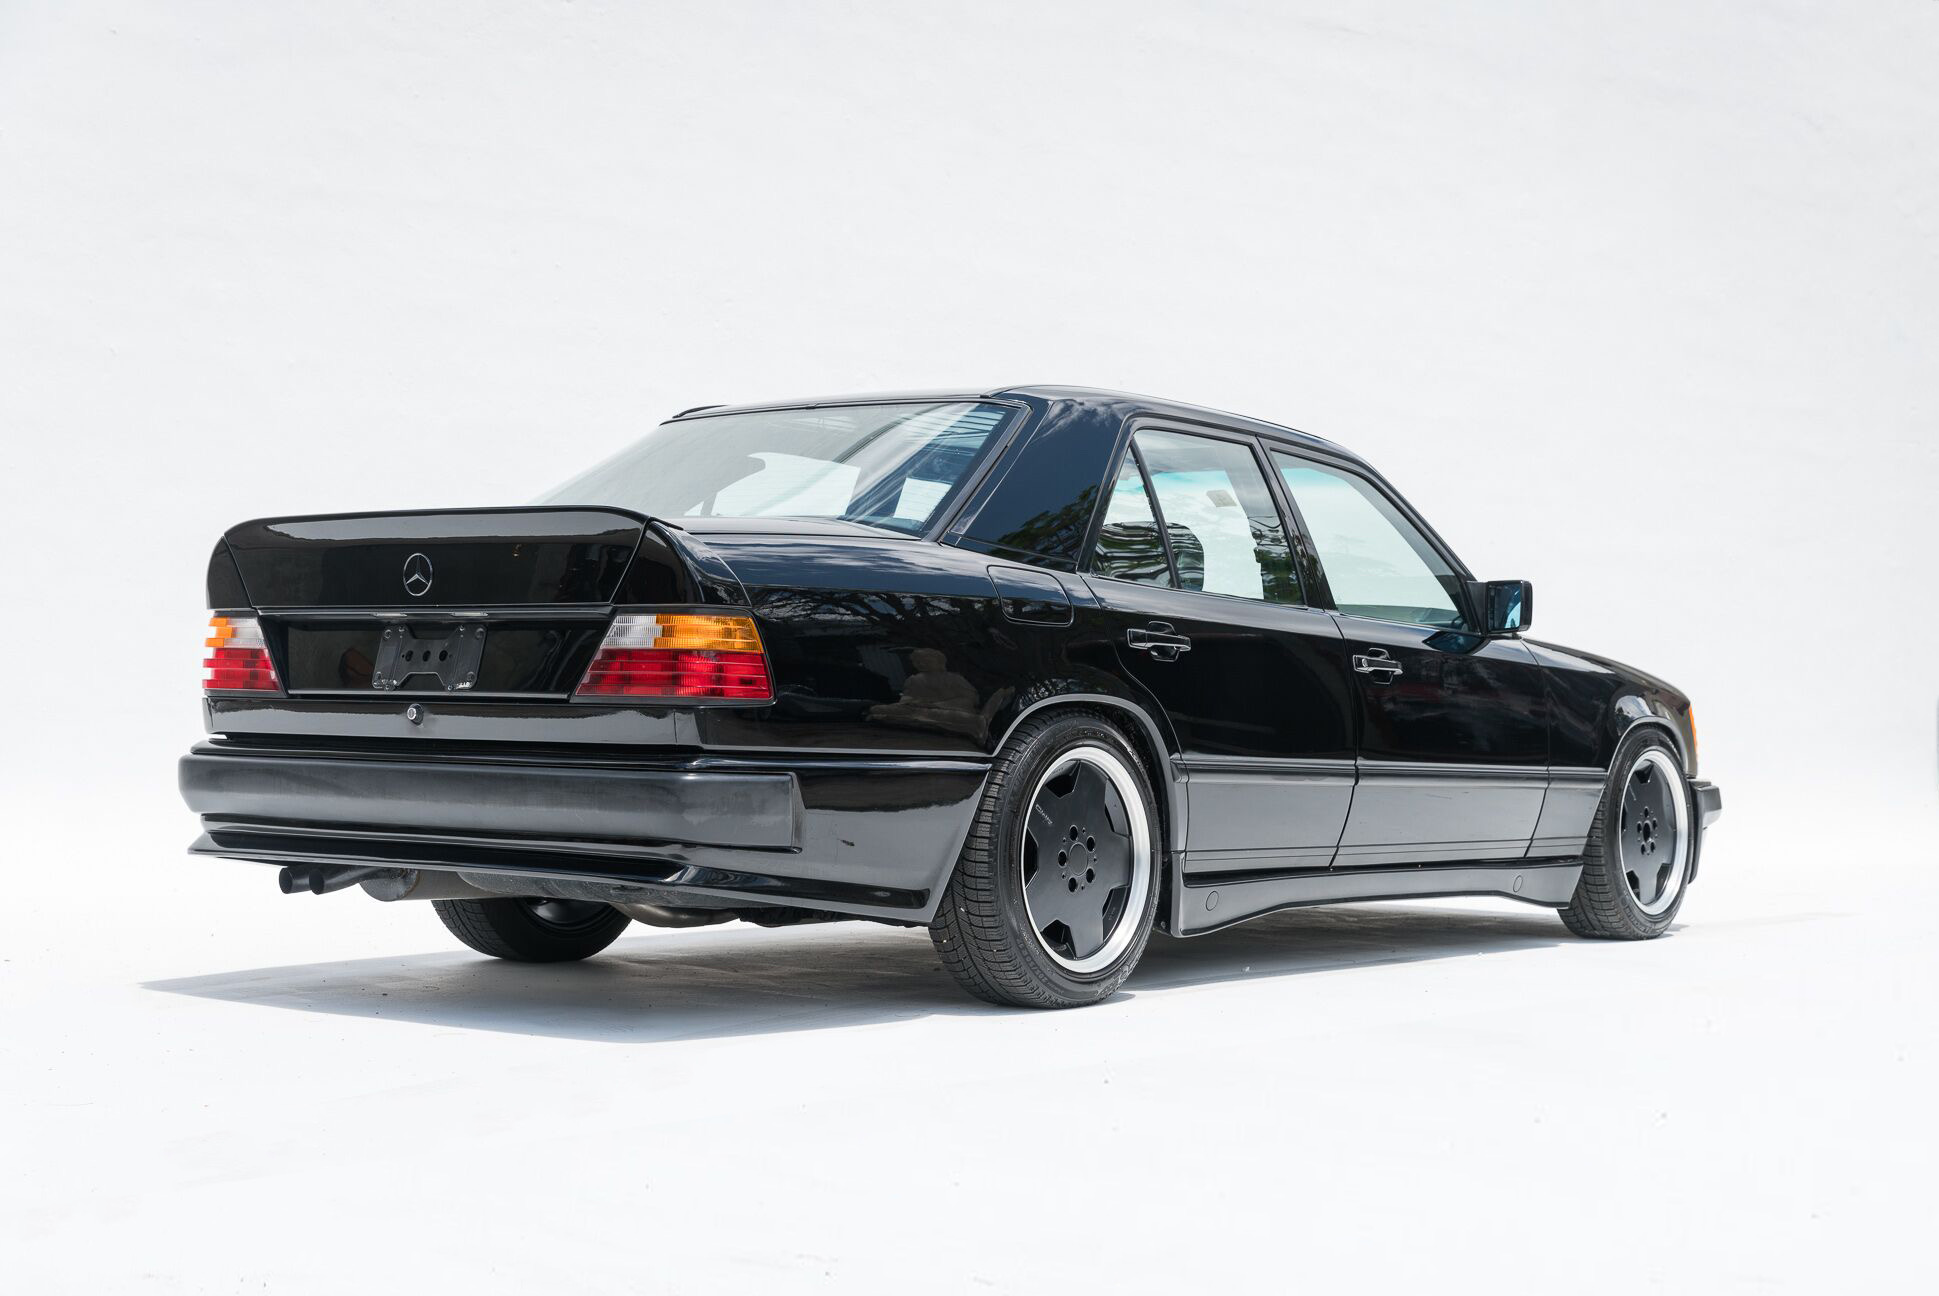 Mercedes AMG Hammer - Specs, History, Foreign Muscle